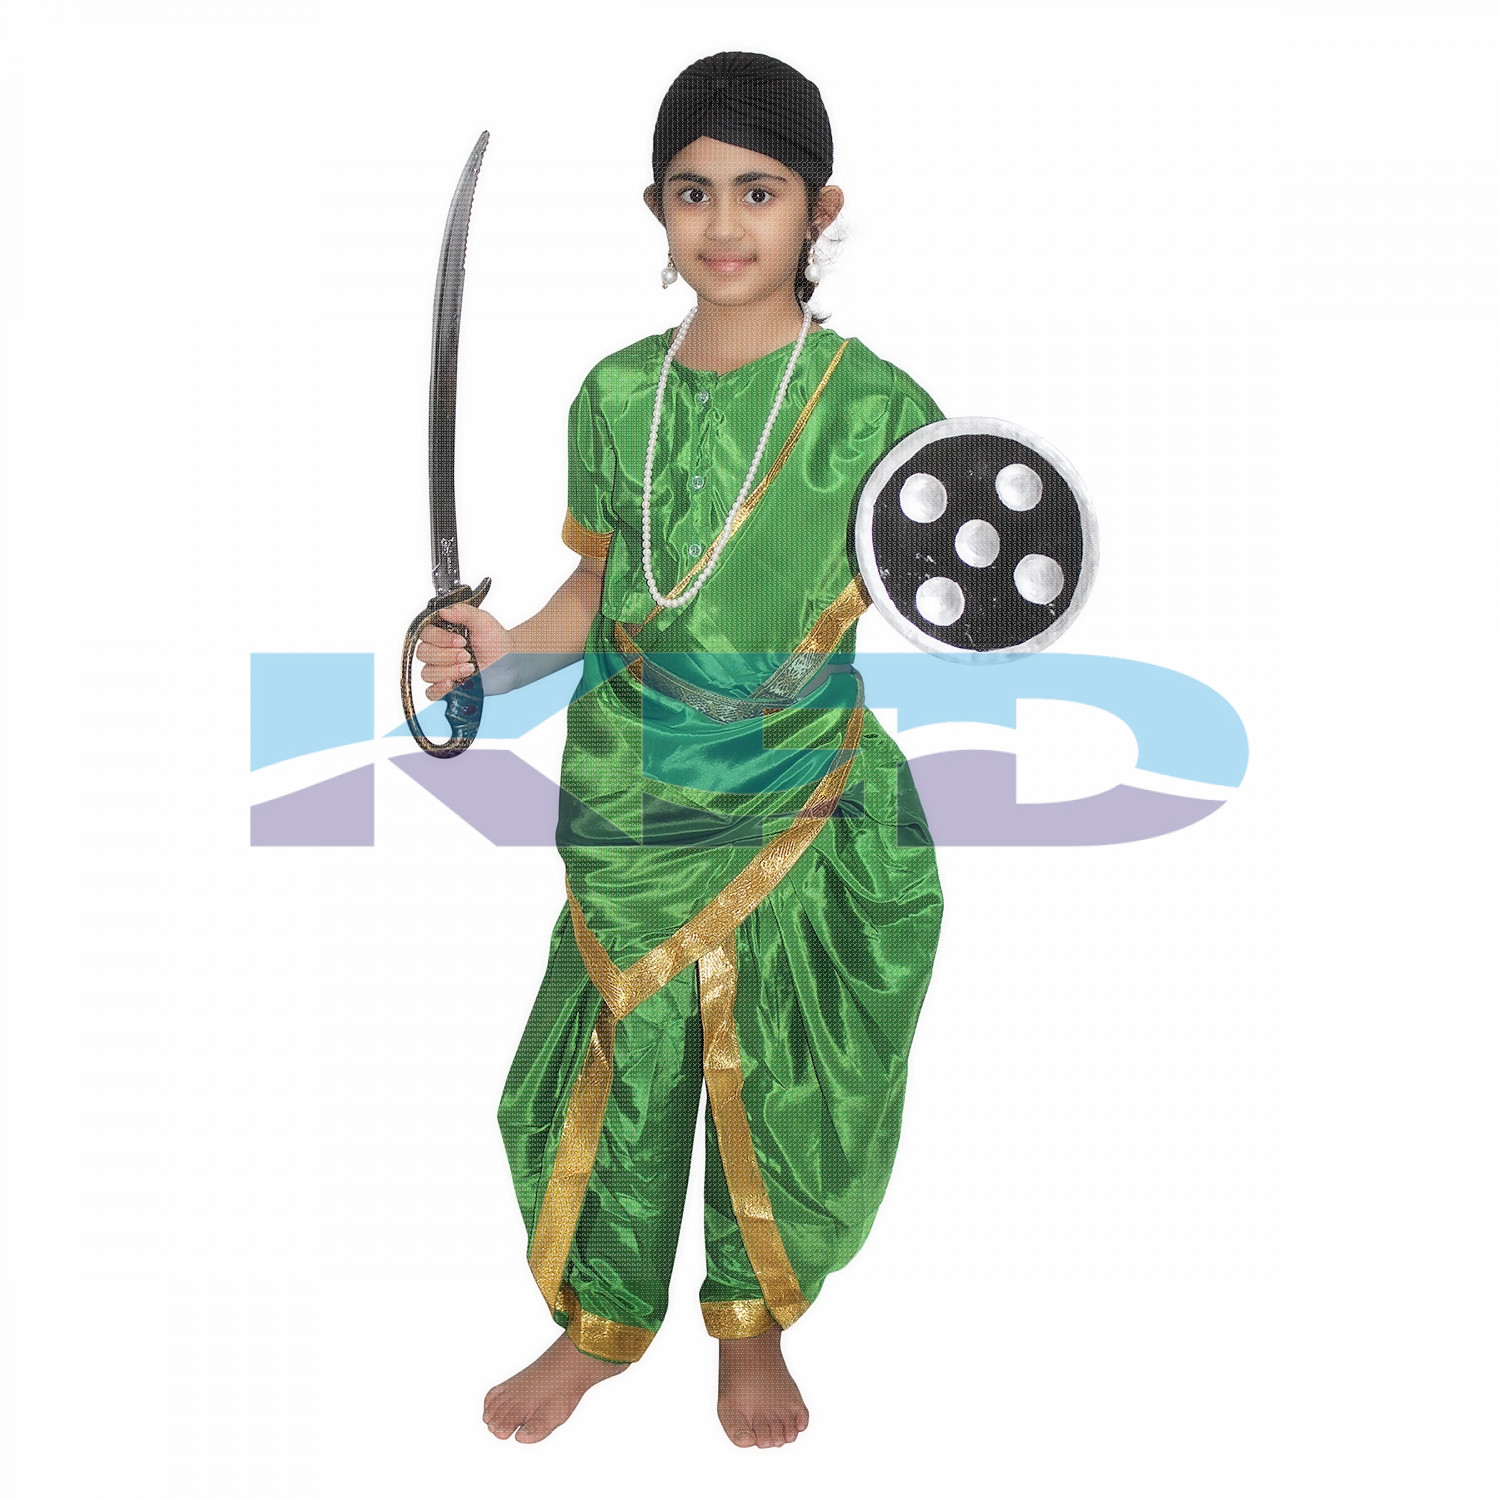  Rani Laxmi Bai Green National Hero/freedom figter Costume for Independence Day/Republic Day/Annual function/theme party/Competition/Stage Shows Dress